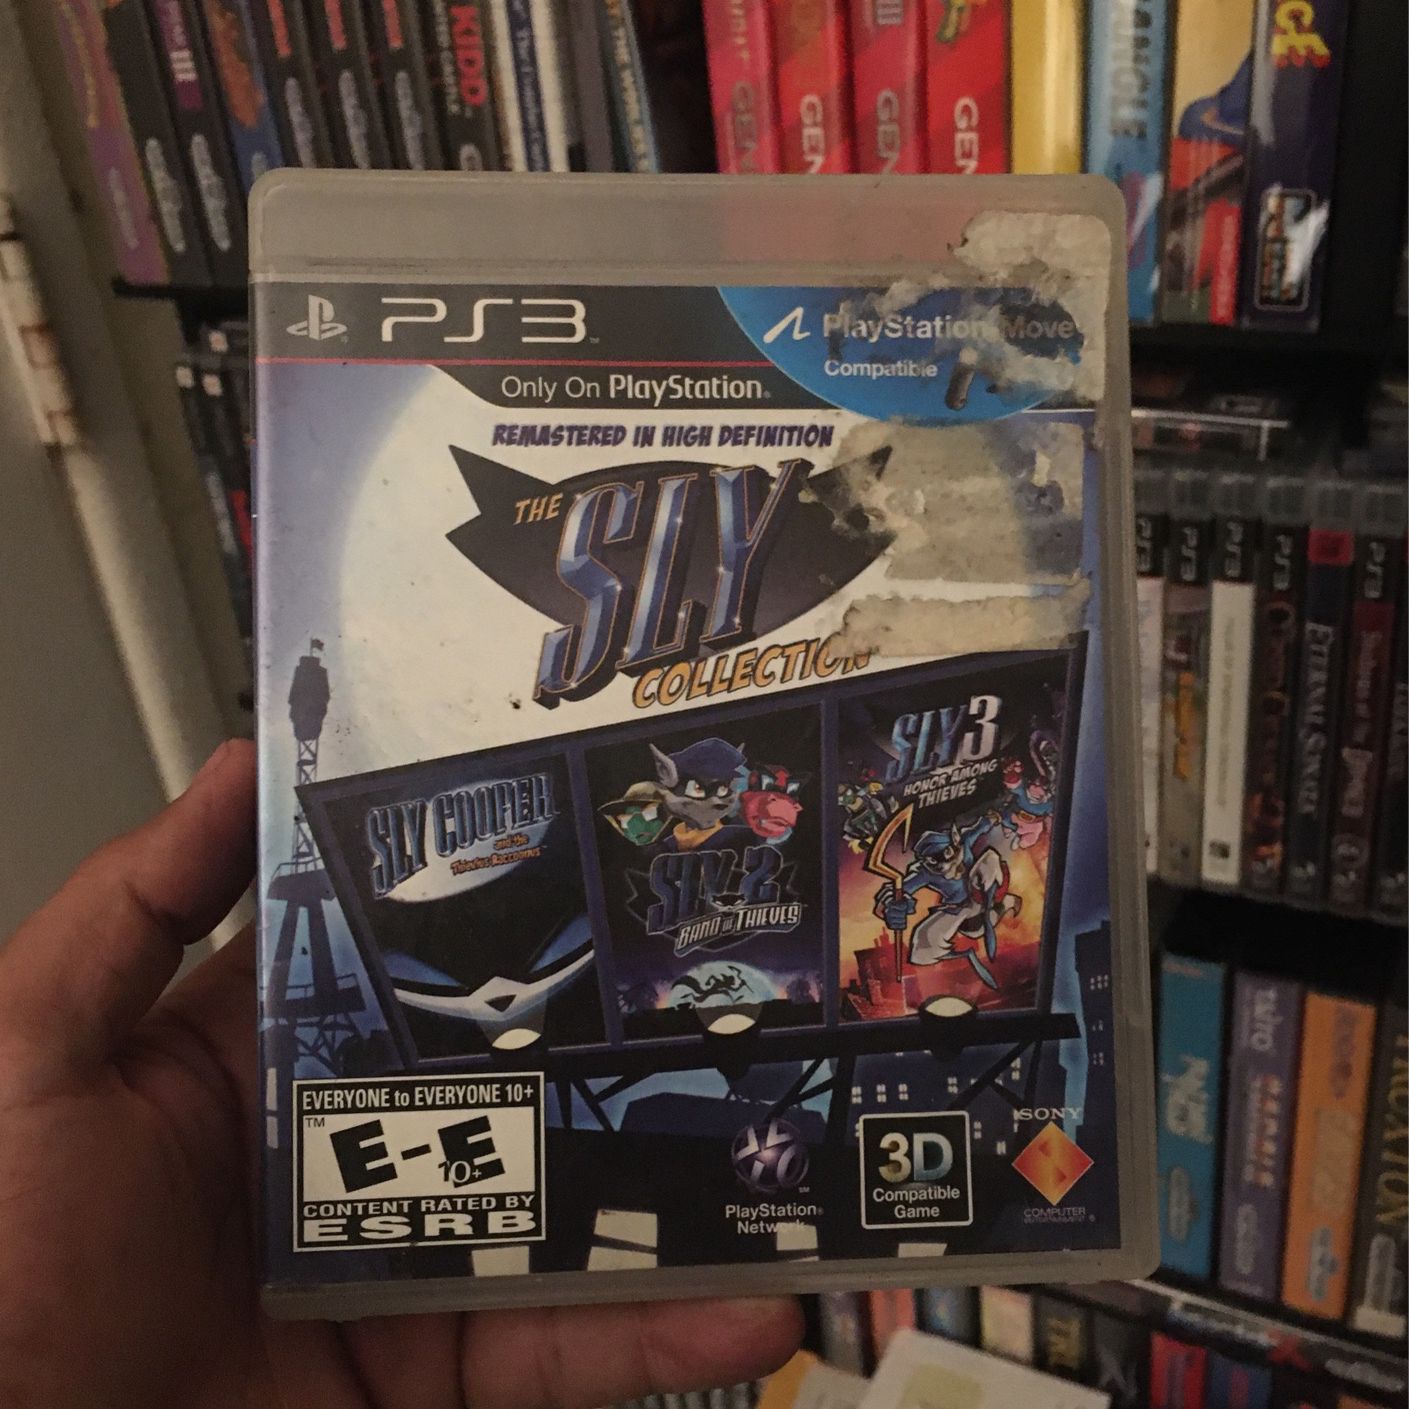 Sly Cooper: Thieves in Time (Sony PlayStation 3, 2013) PS3 - Sanzaru Games  Inc for Sale in Fresno, CA - OfferUp